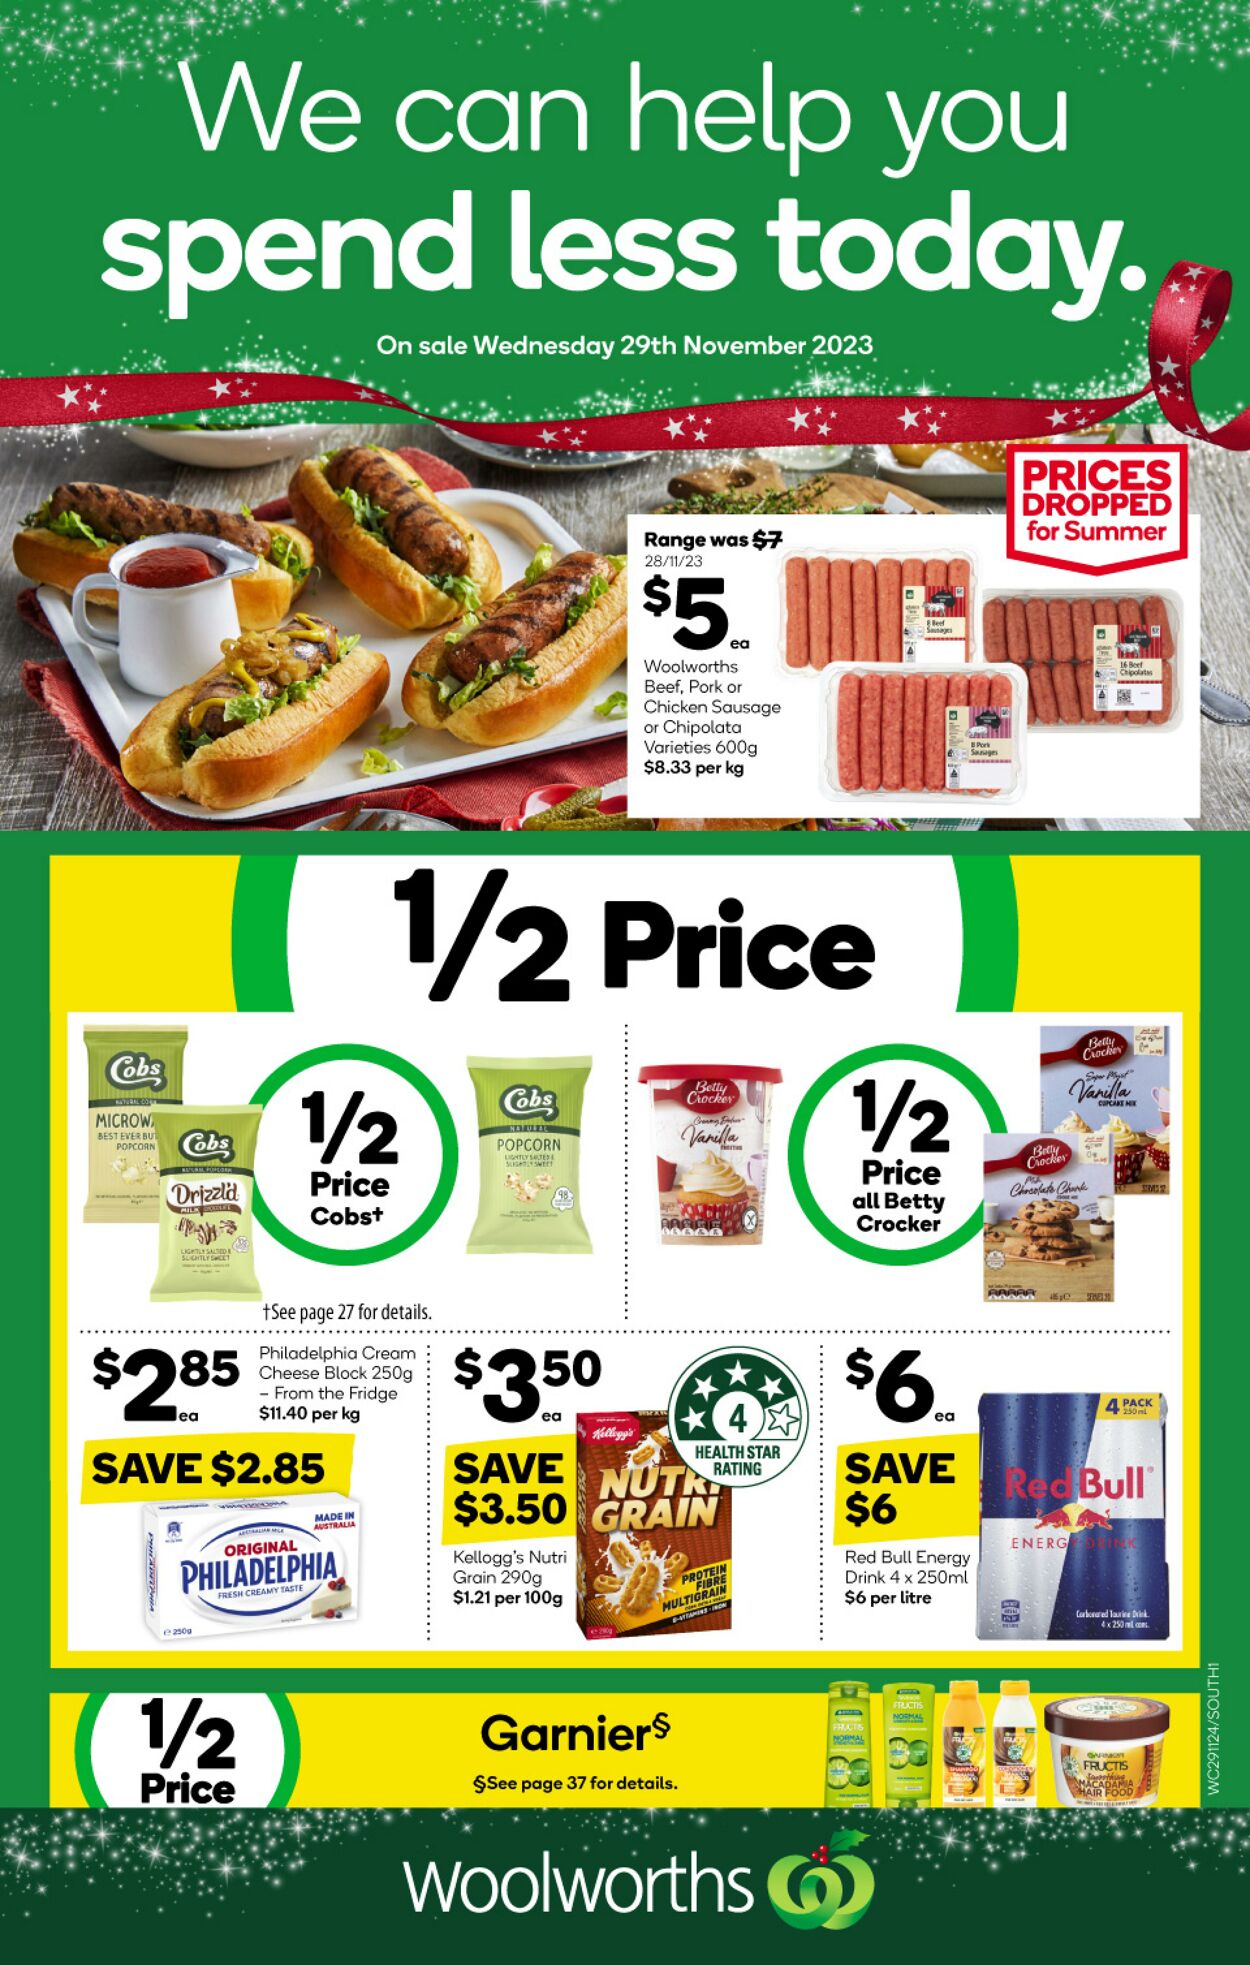 Catalogue Woolworths - Weekly Specials Catalogue NSW South 29 Nov, 2023 - 5 Dec, 2023